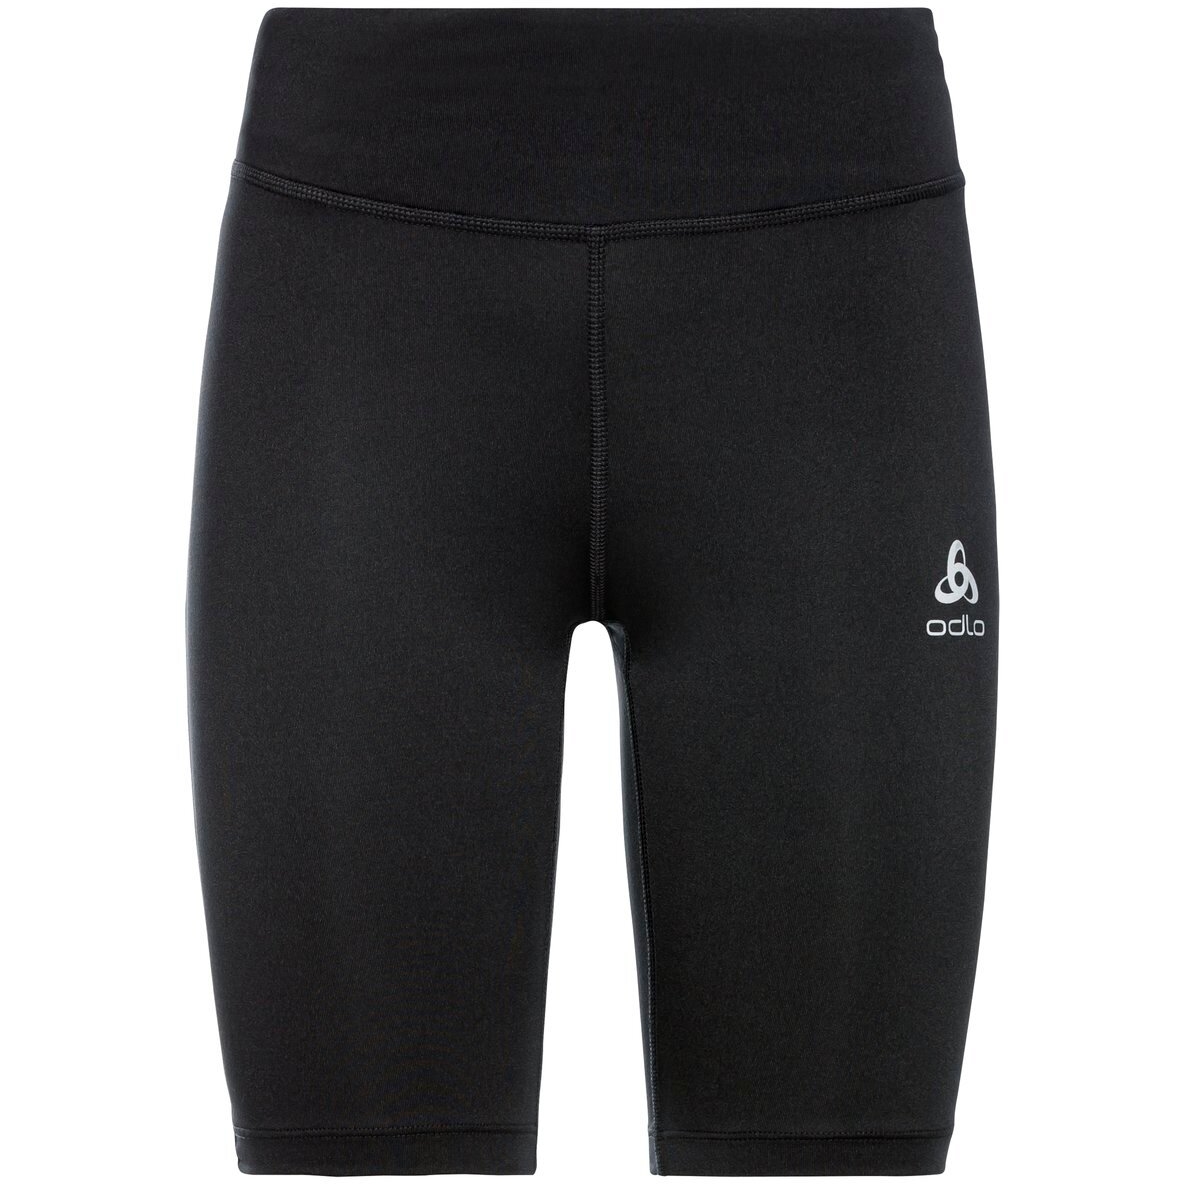 Picture of Odlo Essentials Tight Shorts Women - black